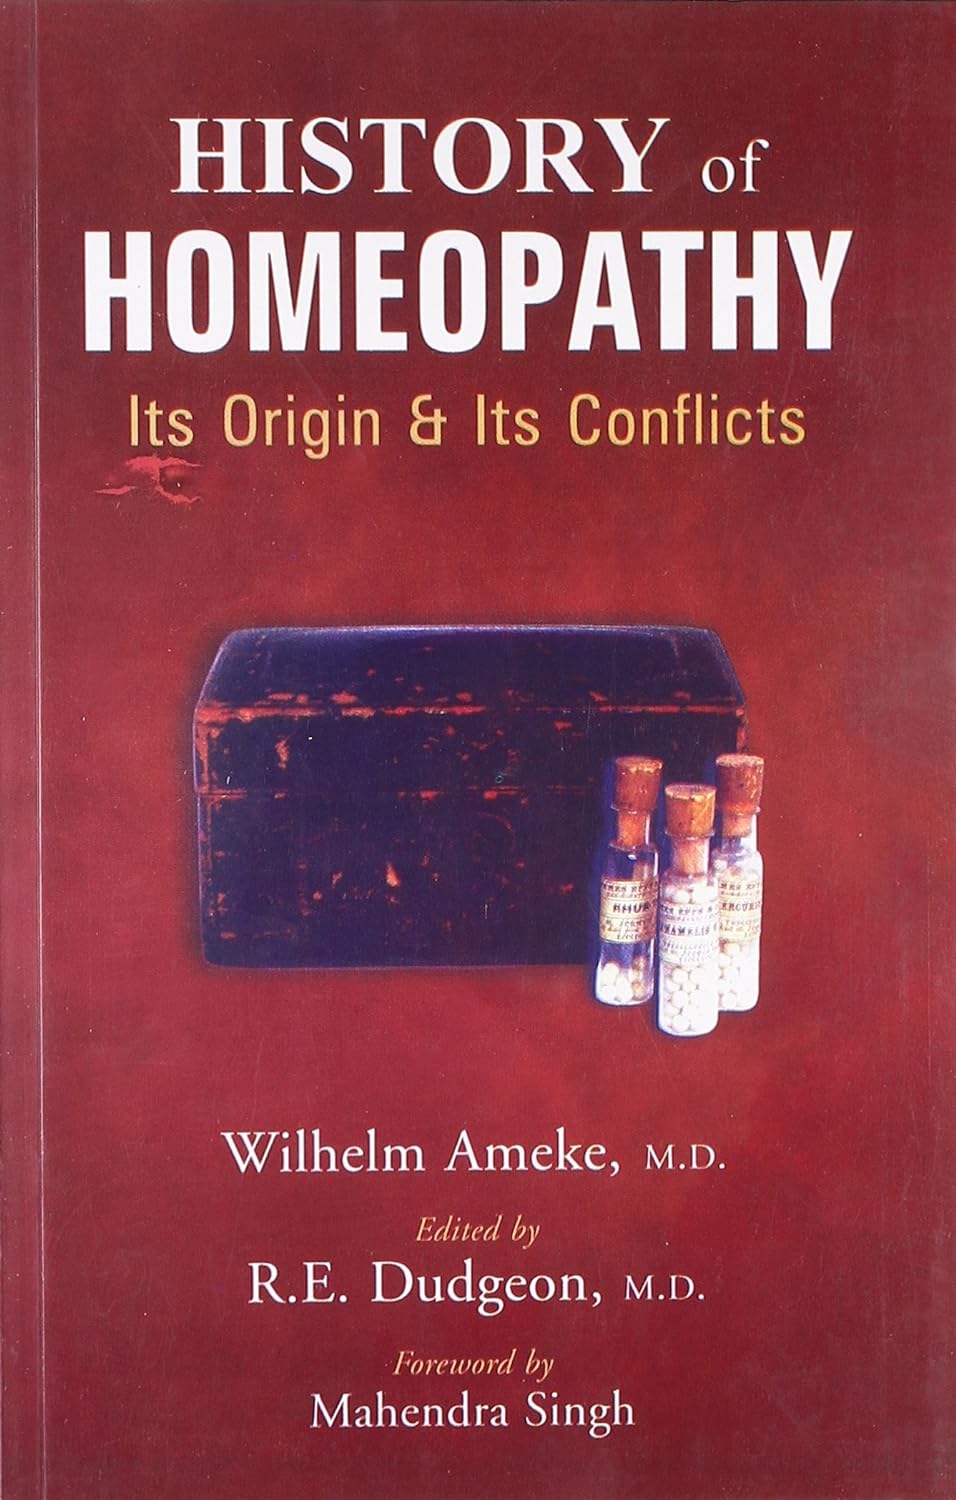 History Of Homeopathy, Its Origin & Its Conflicts